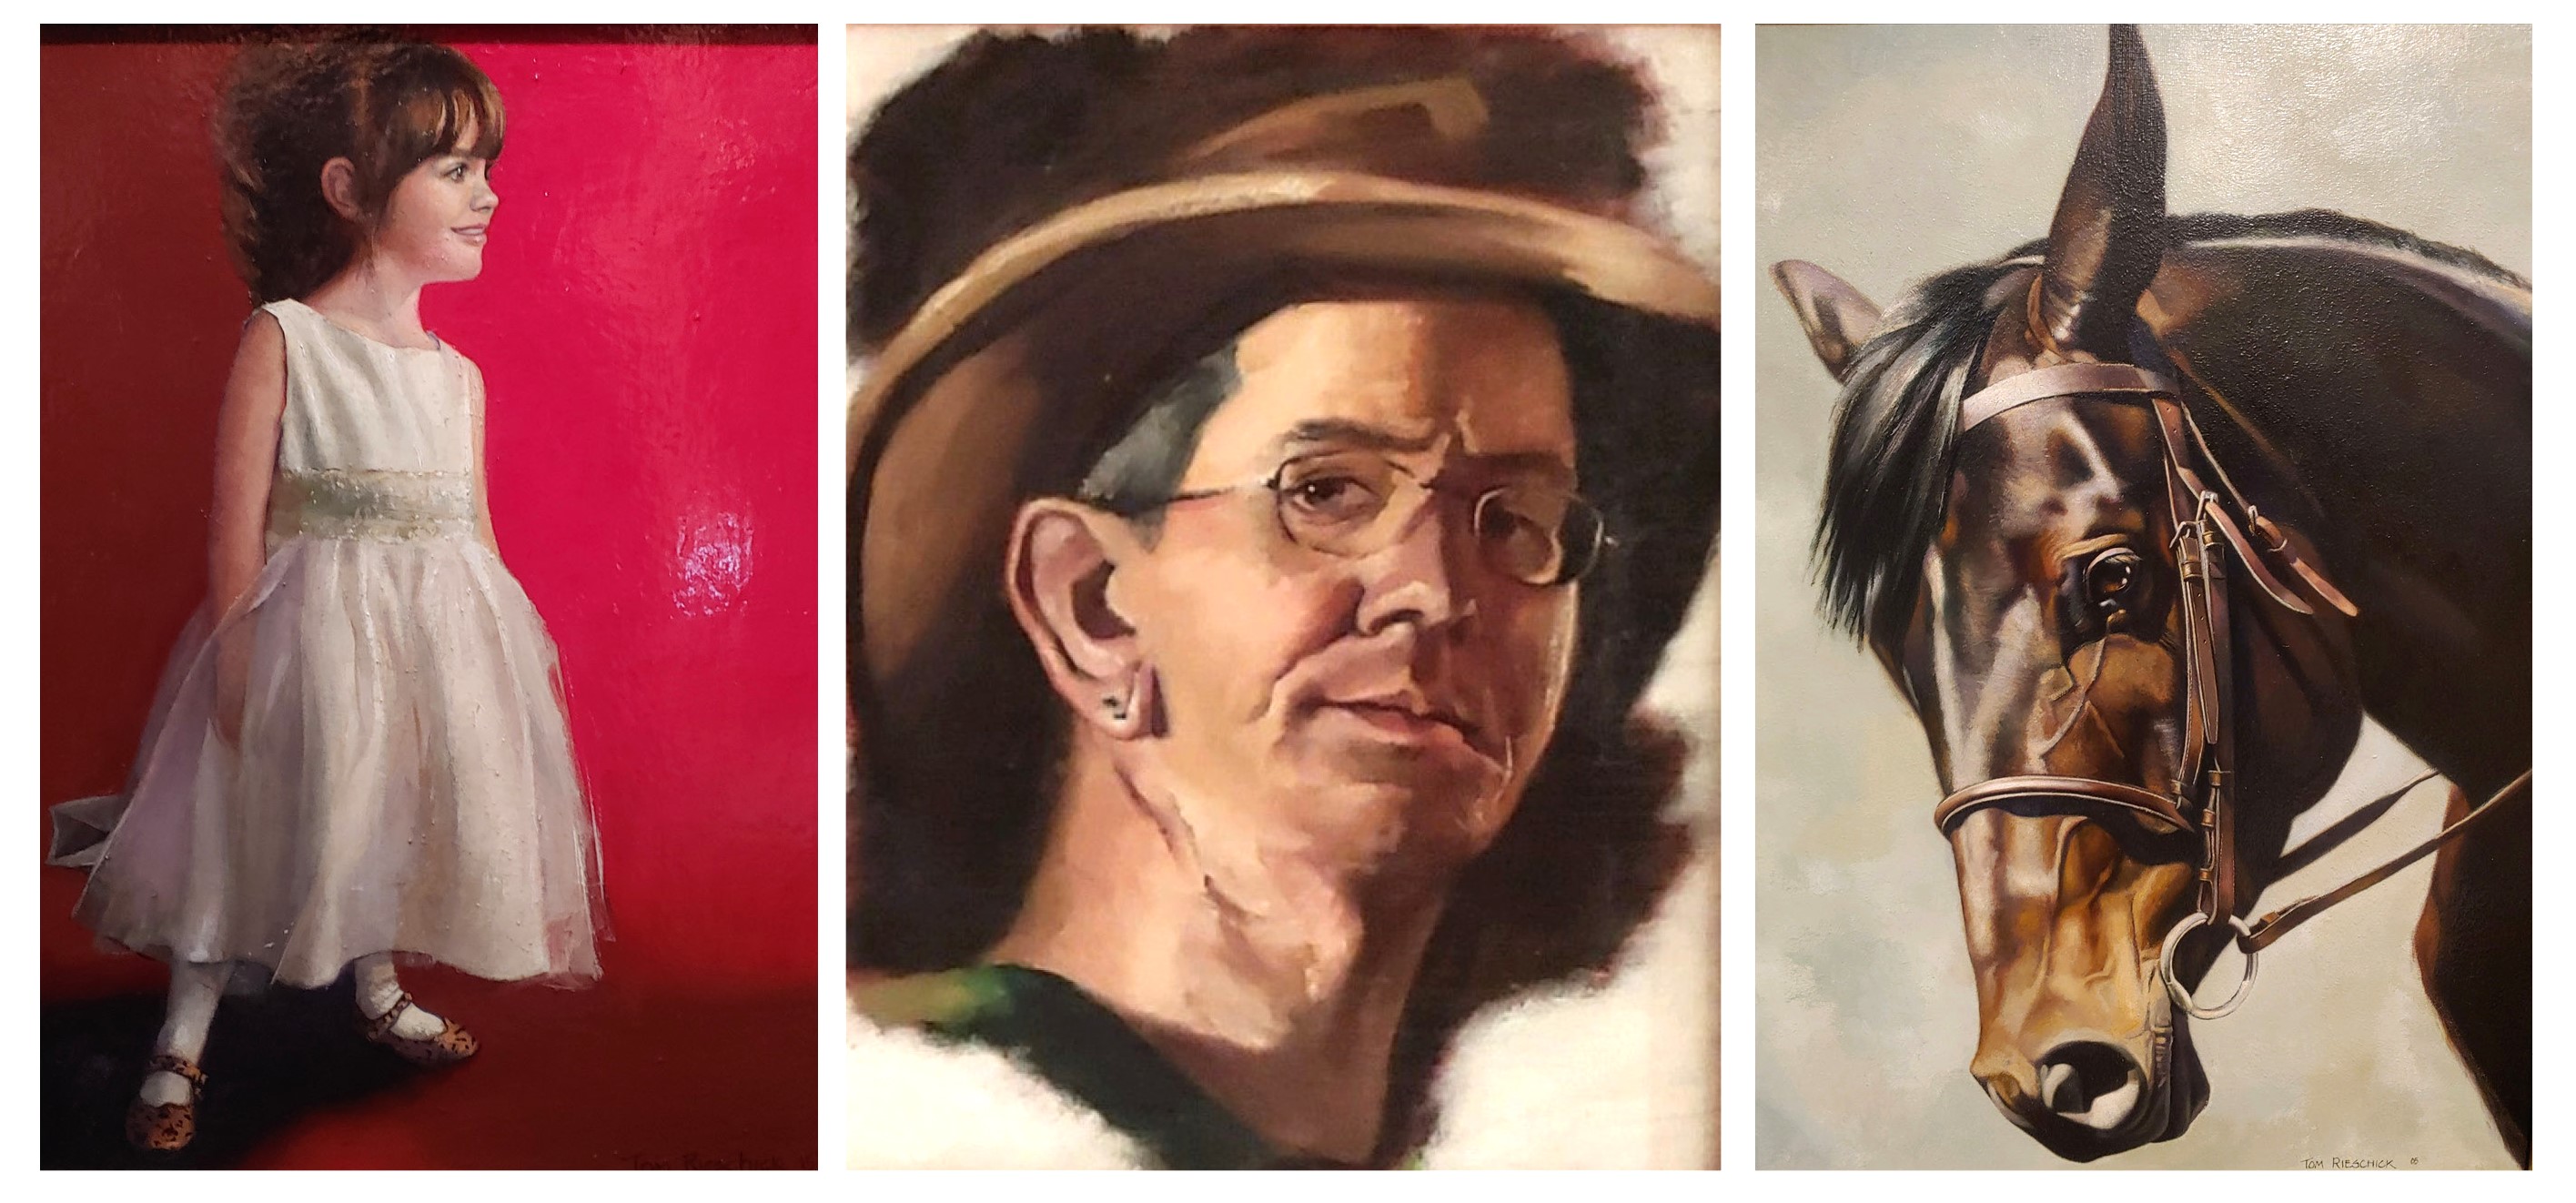 Self portrait and two additional paintings by Fergus Falls artist Tom Rieschick.